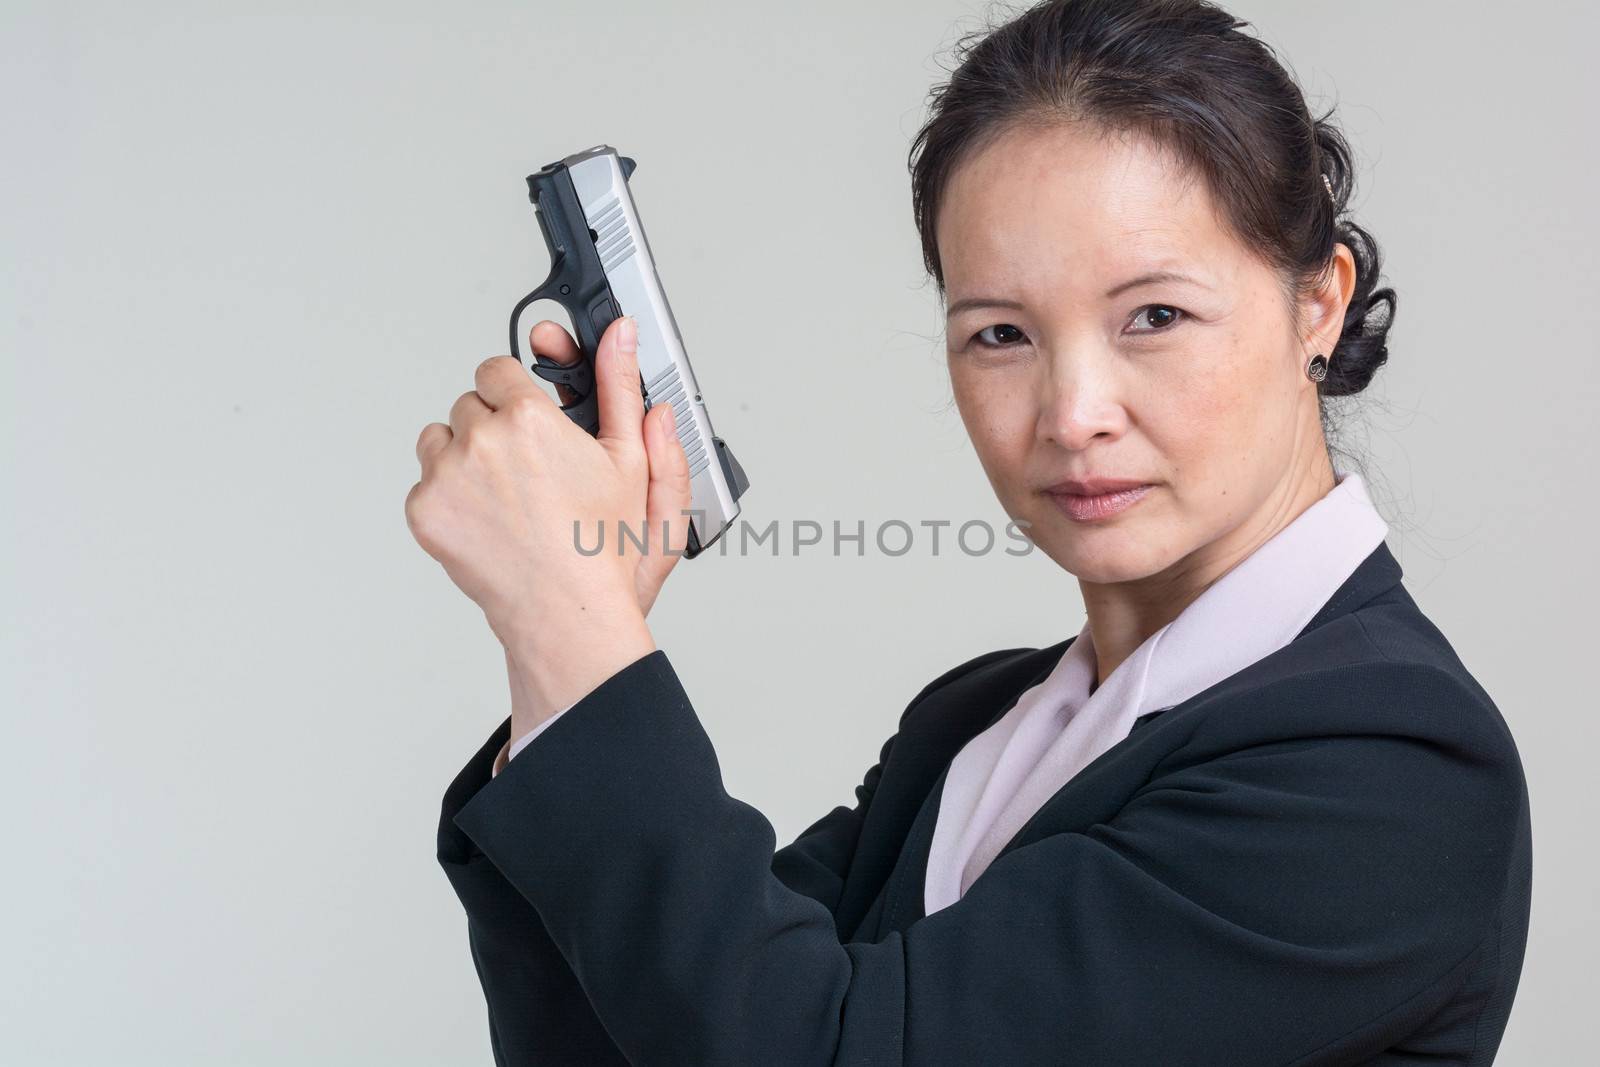 Portrait of woman in business suit holding a hand gun with agent pose on grey background